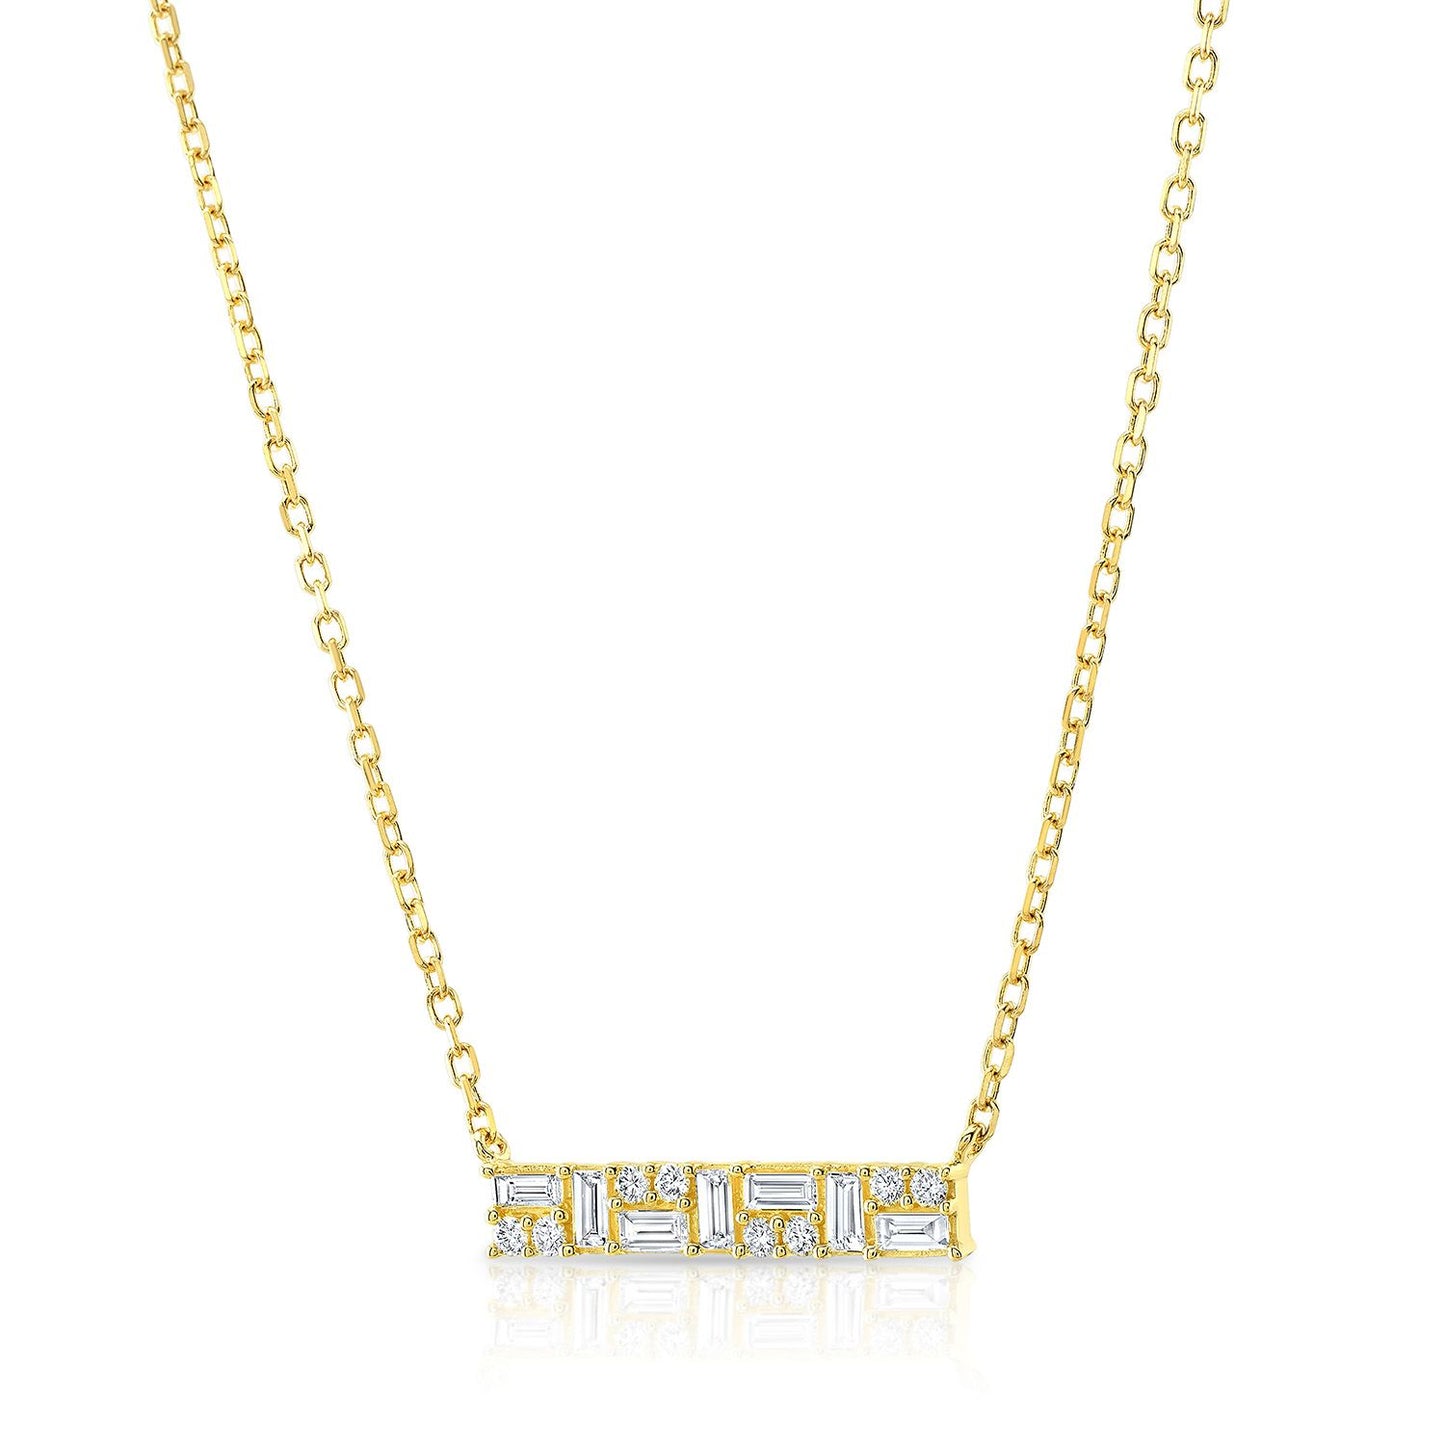 Diamond Baguette And Round Mosaic Bar Necklace In 14k Yellow Gold, 16-18 Inch Adj Chain